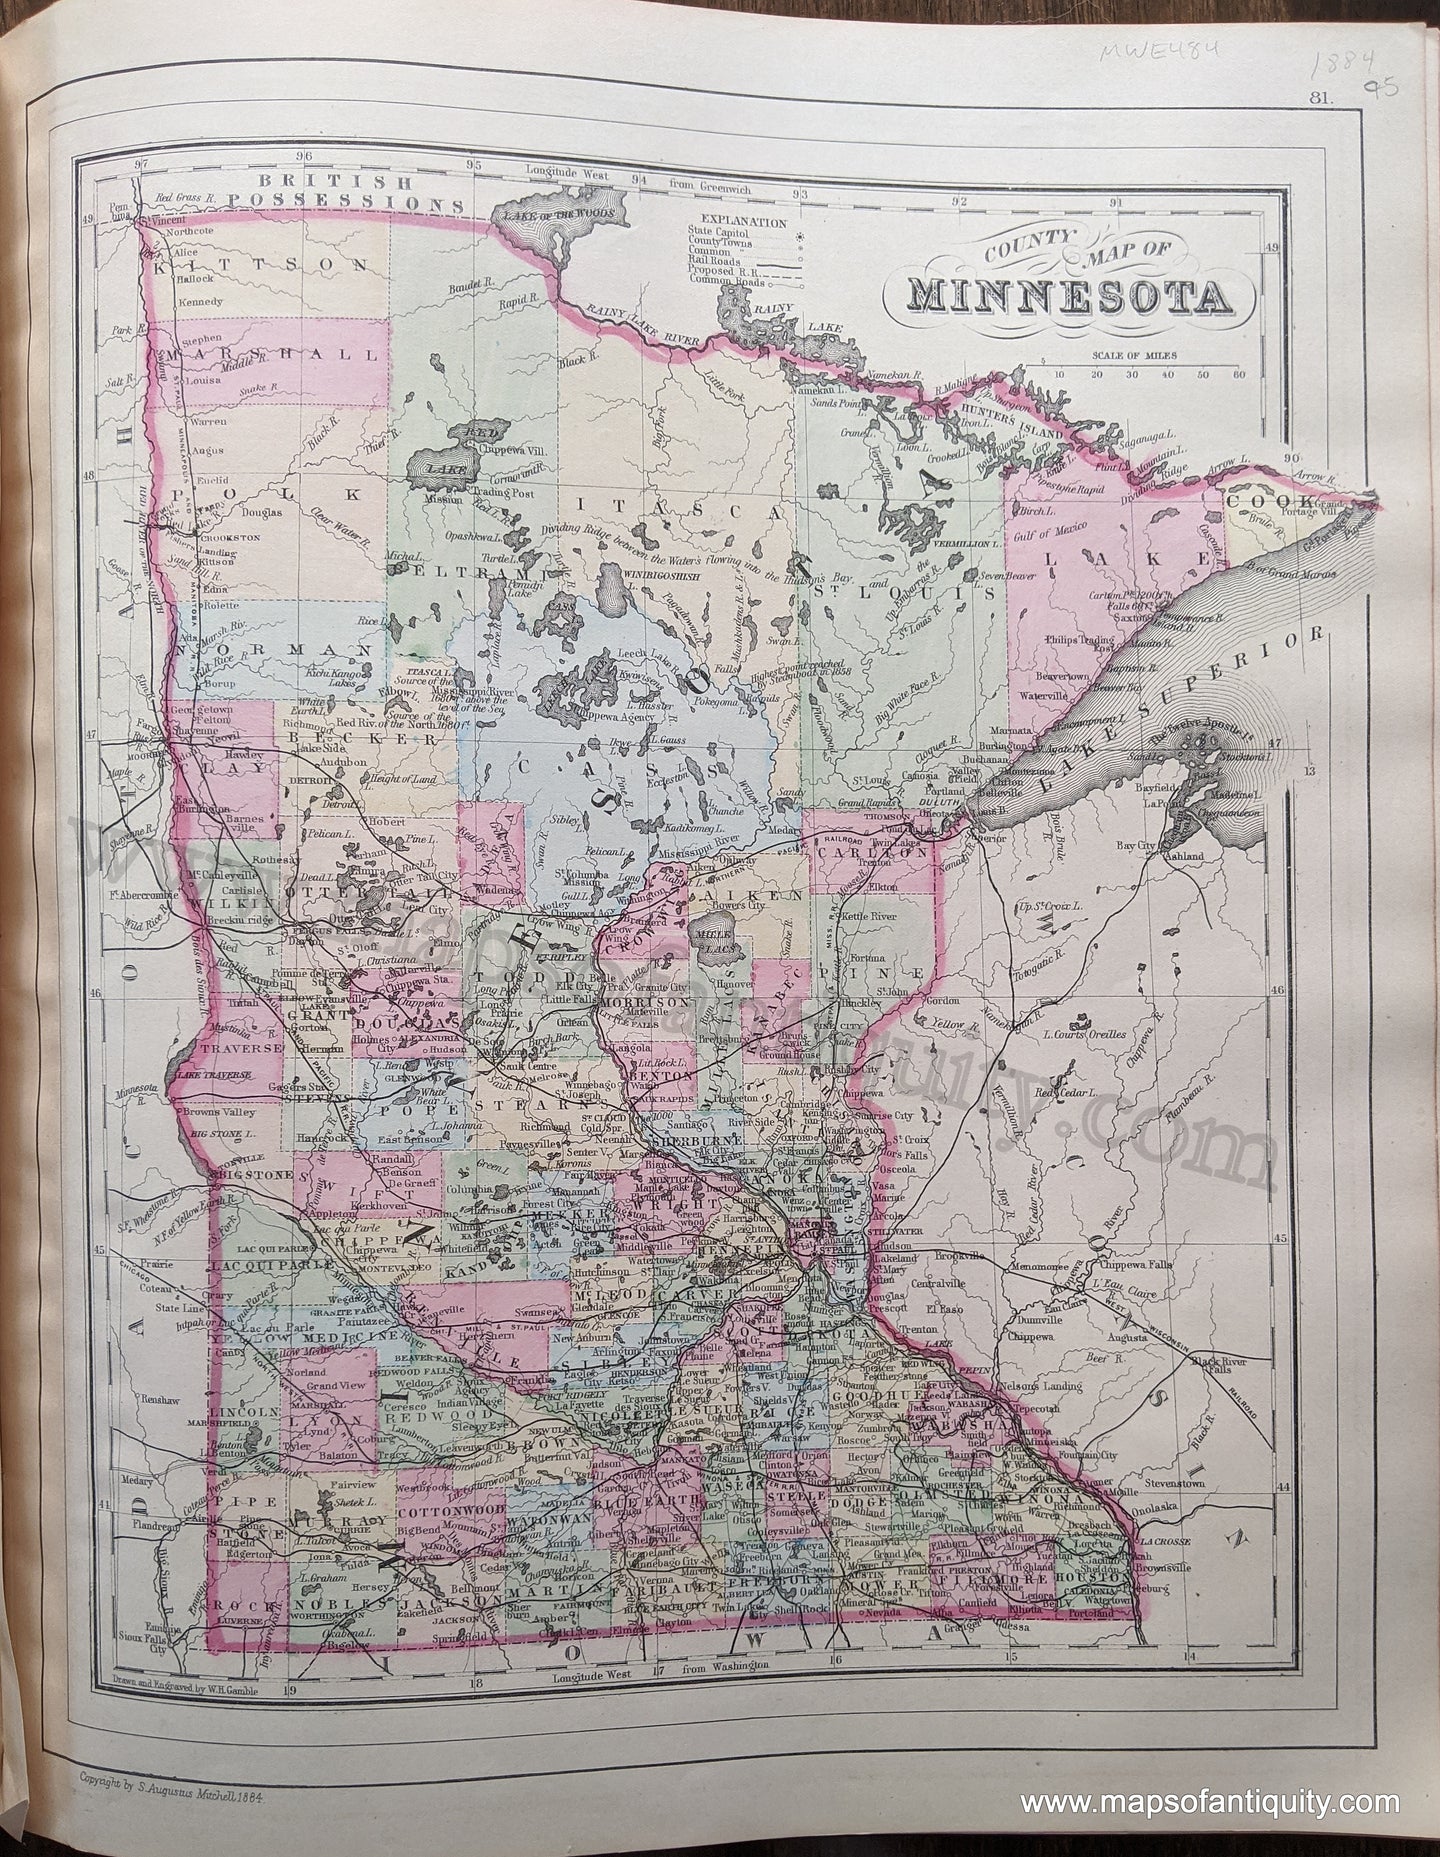 Antique-Hand-Colored-Map-County-Map-of-Minnesota-United-States-Midwest-1884-Mitchell-Maps-Of-Antiquity-1800s-19th-century